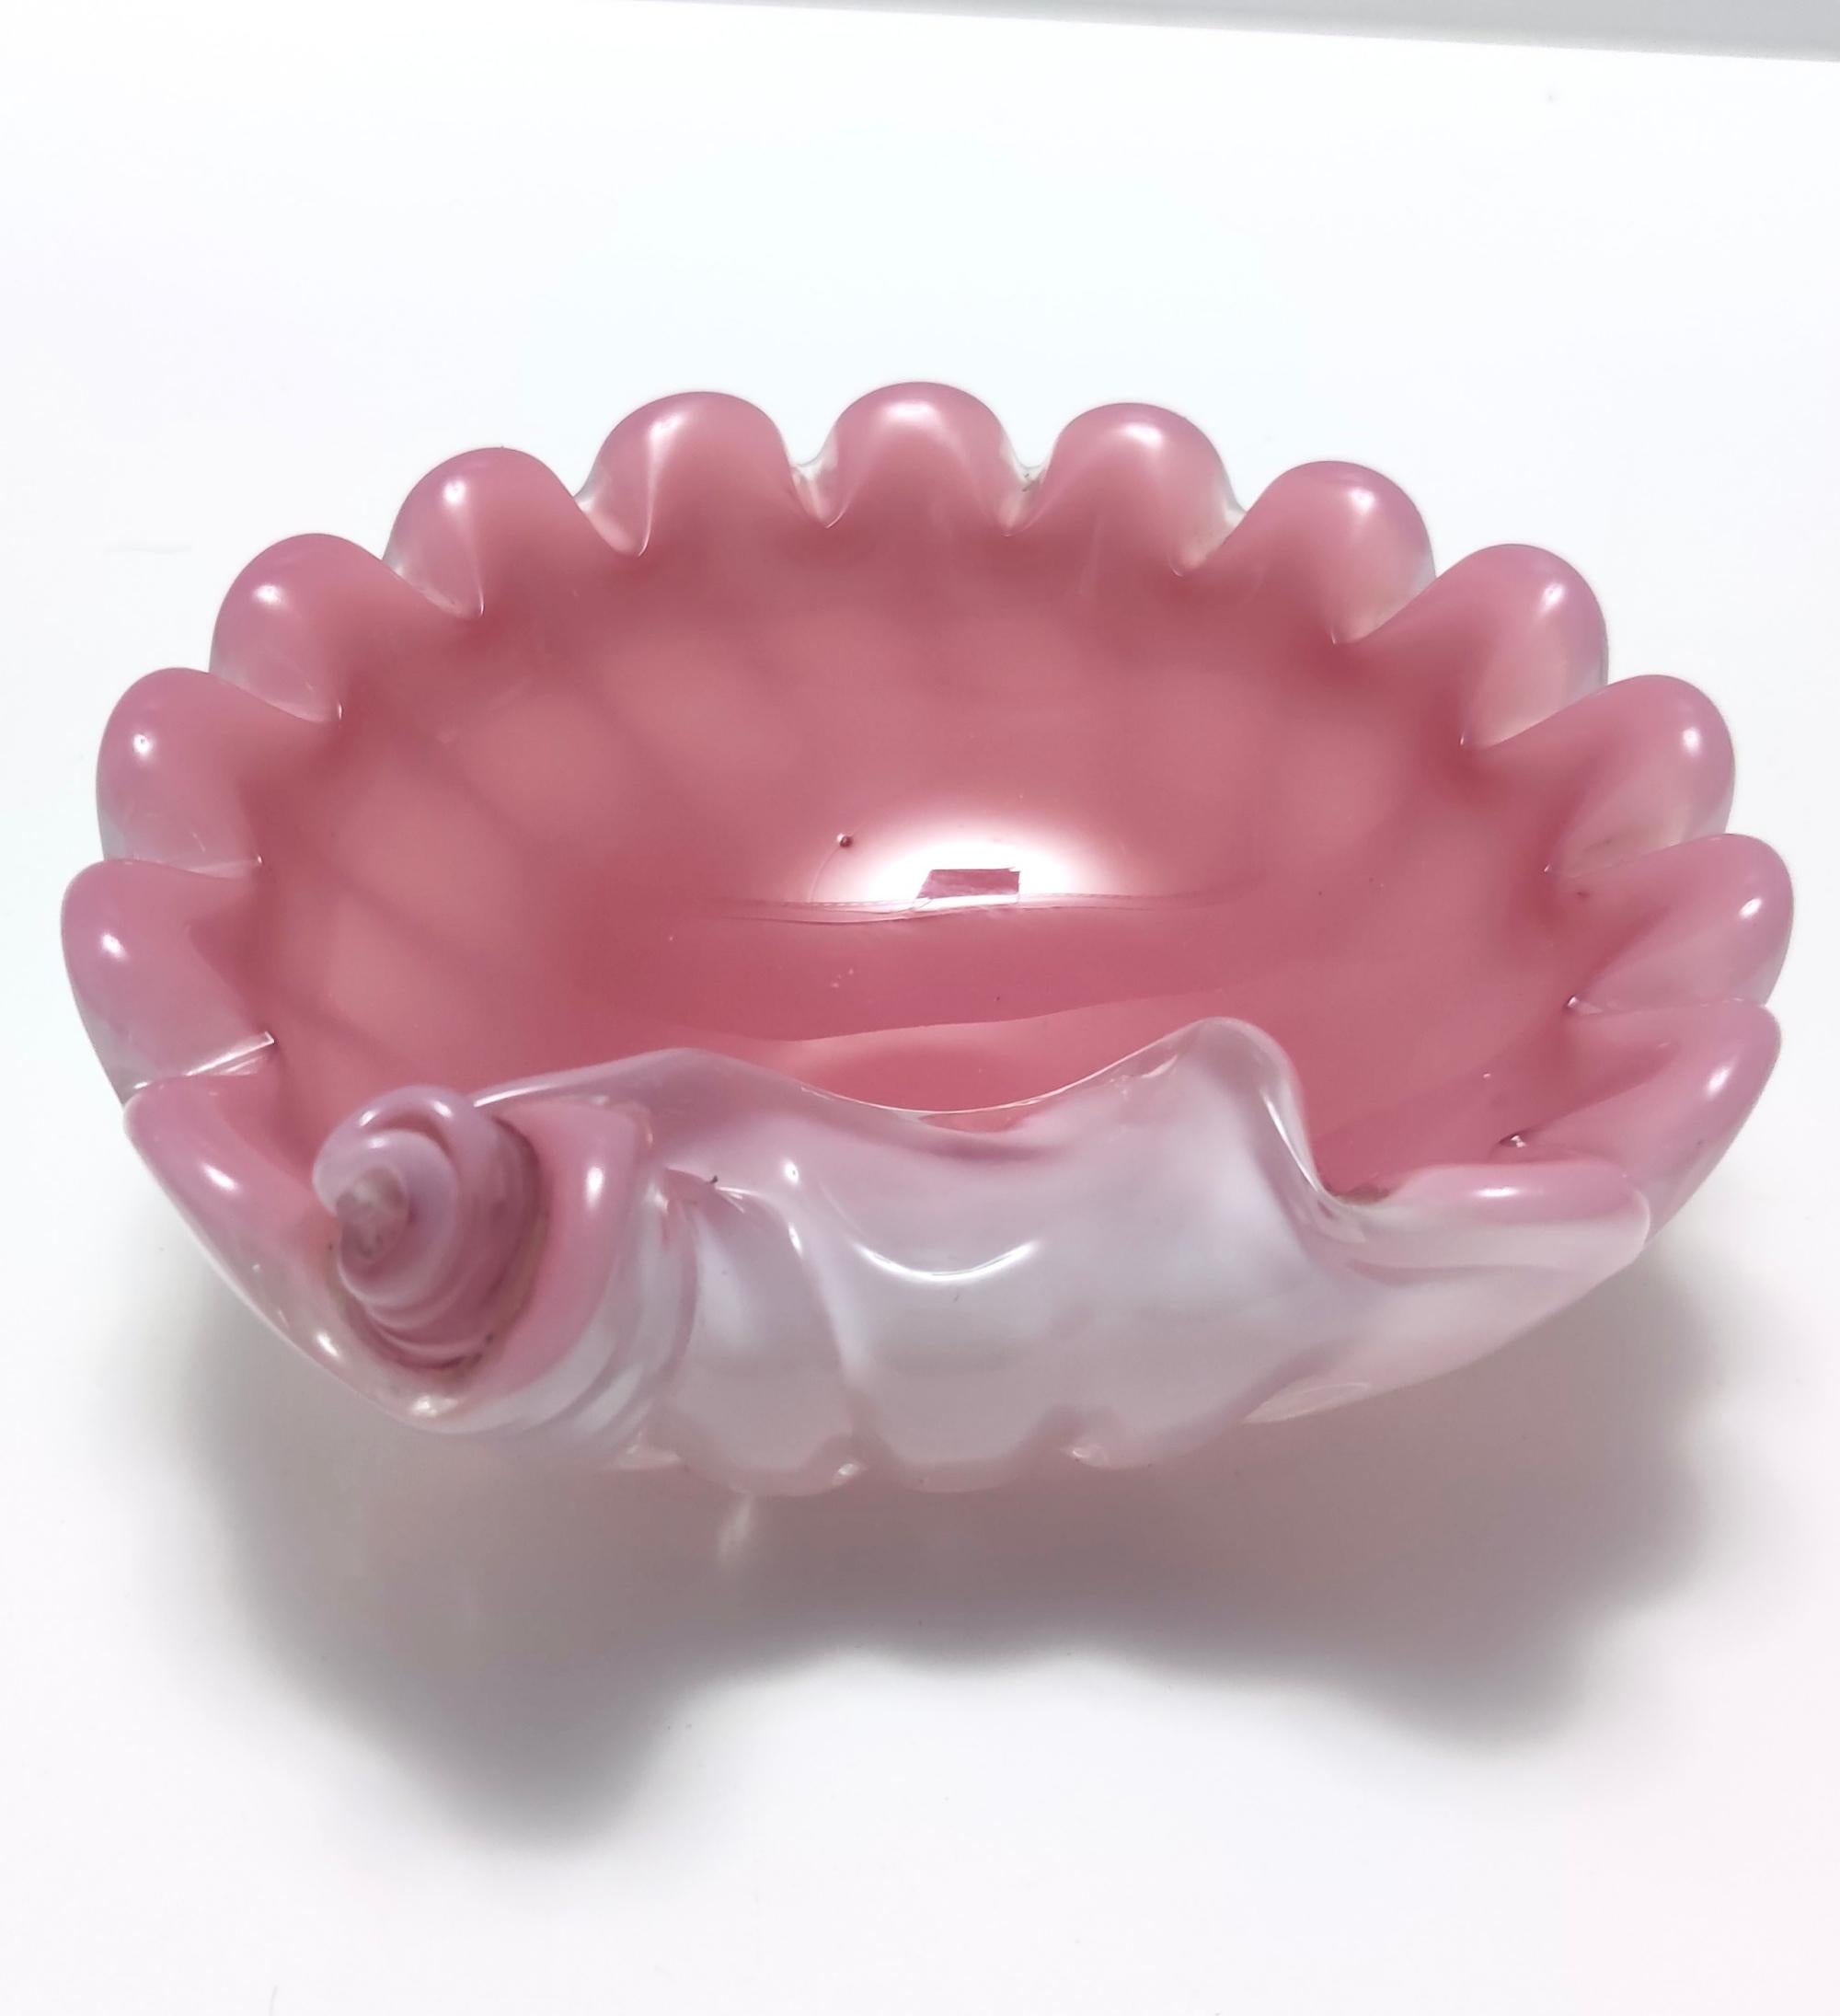 Pink Opaline and Lattimo Glass Shell Bowl or Ashtray by Fratelli Toso, Italy For Sale 2